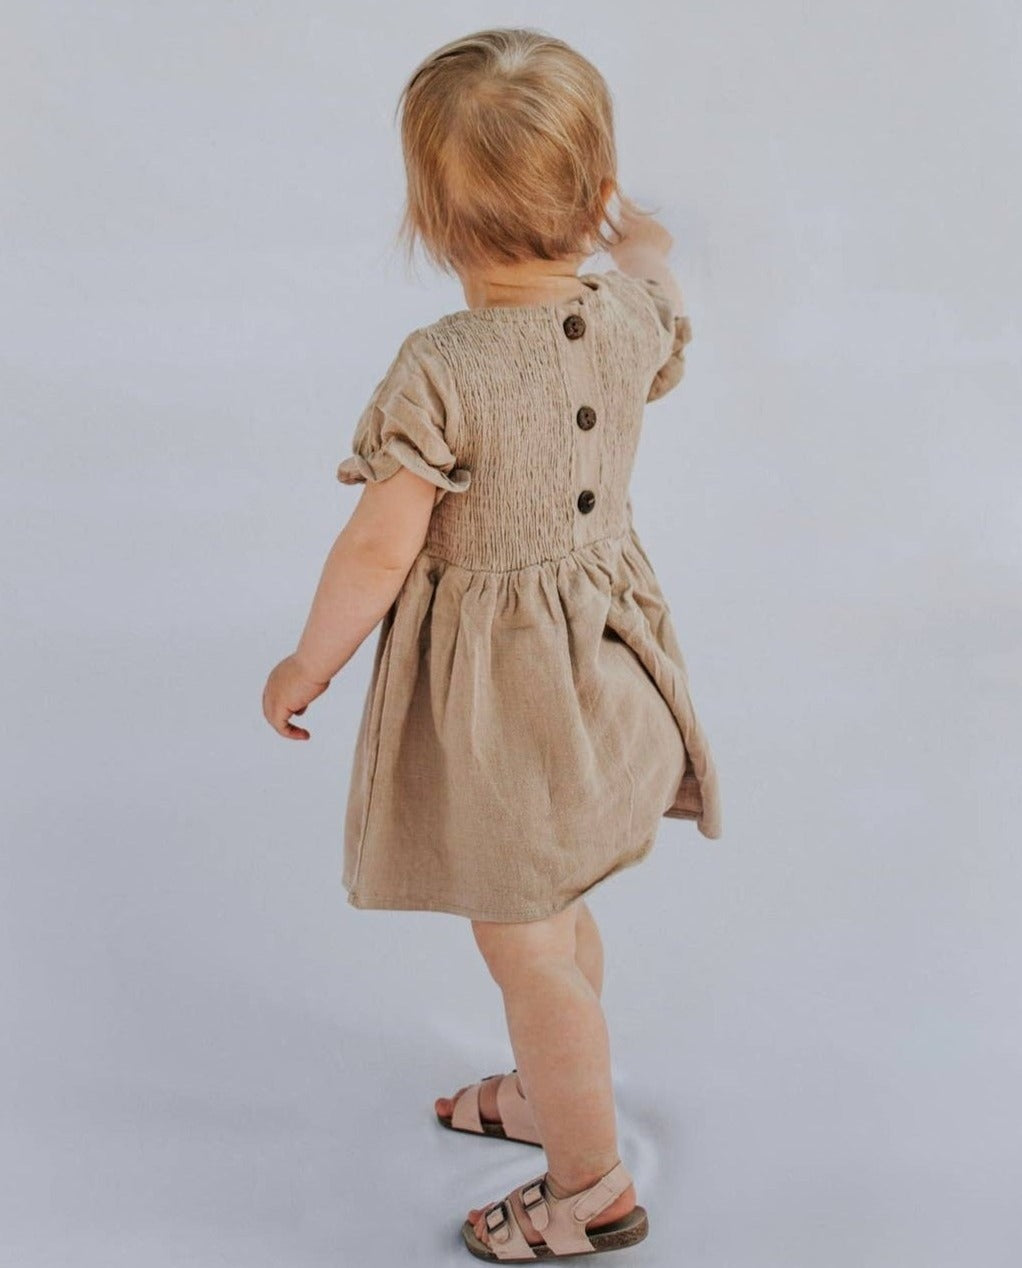 Remi Short Sleeve Dress - Taupe